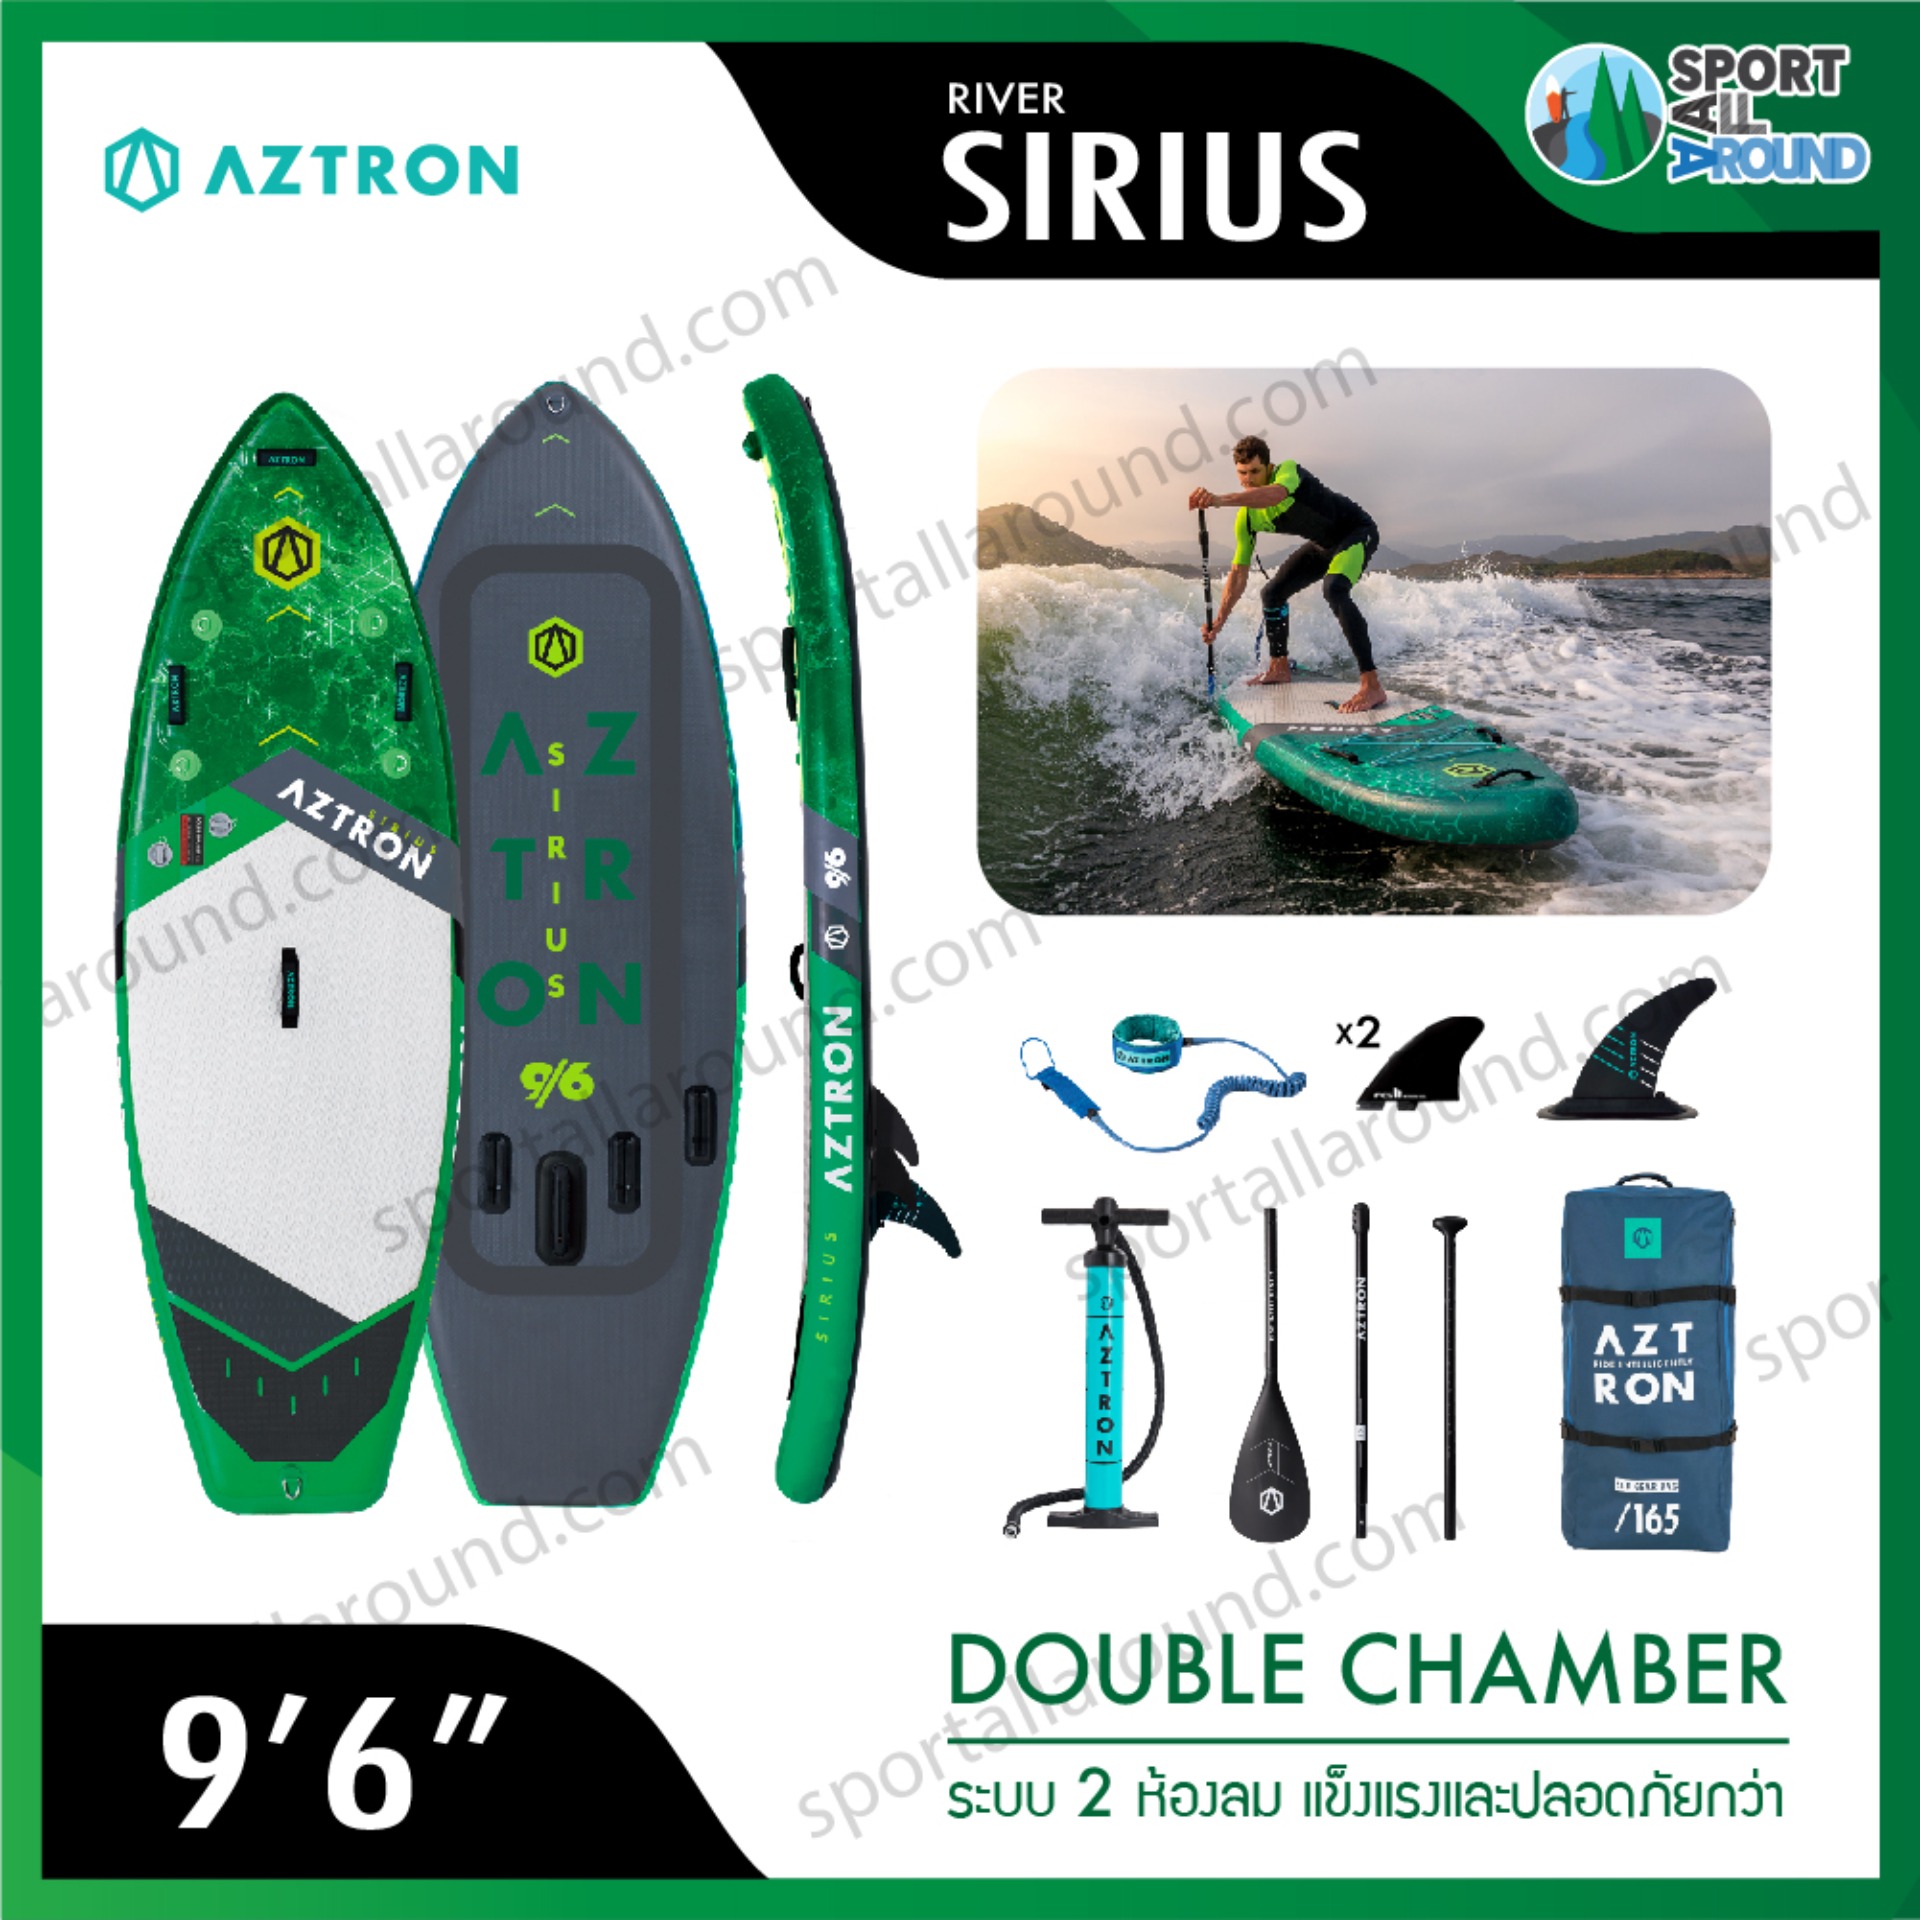 AZTRON SUP SIRIUS 9'6 INFLATABLE STAND UP PADDLE BOARD SUP บอร์ดยืนพาย รับประกัน 1 ปี